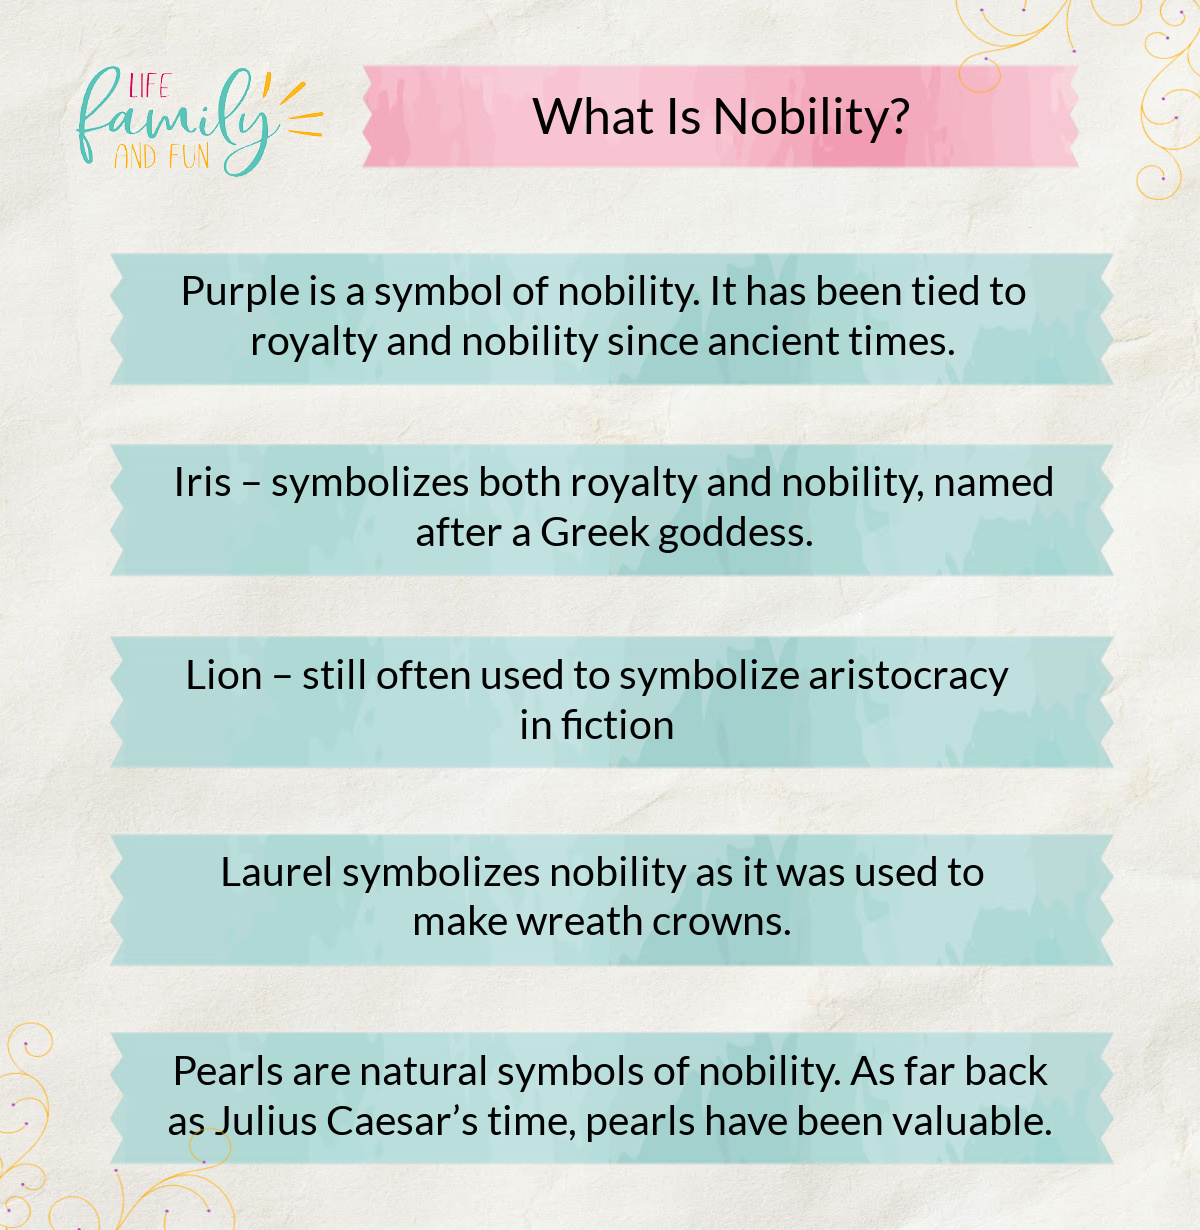 What Is Nobility?